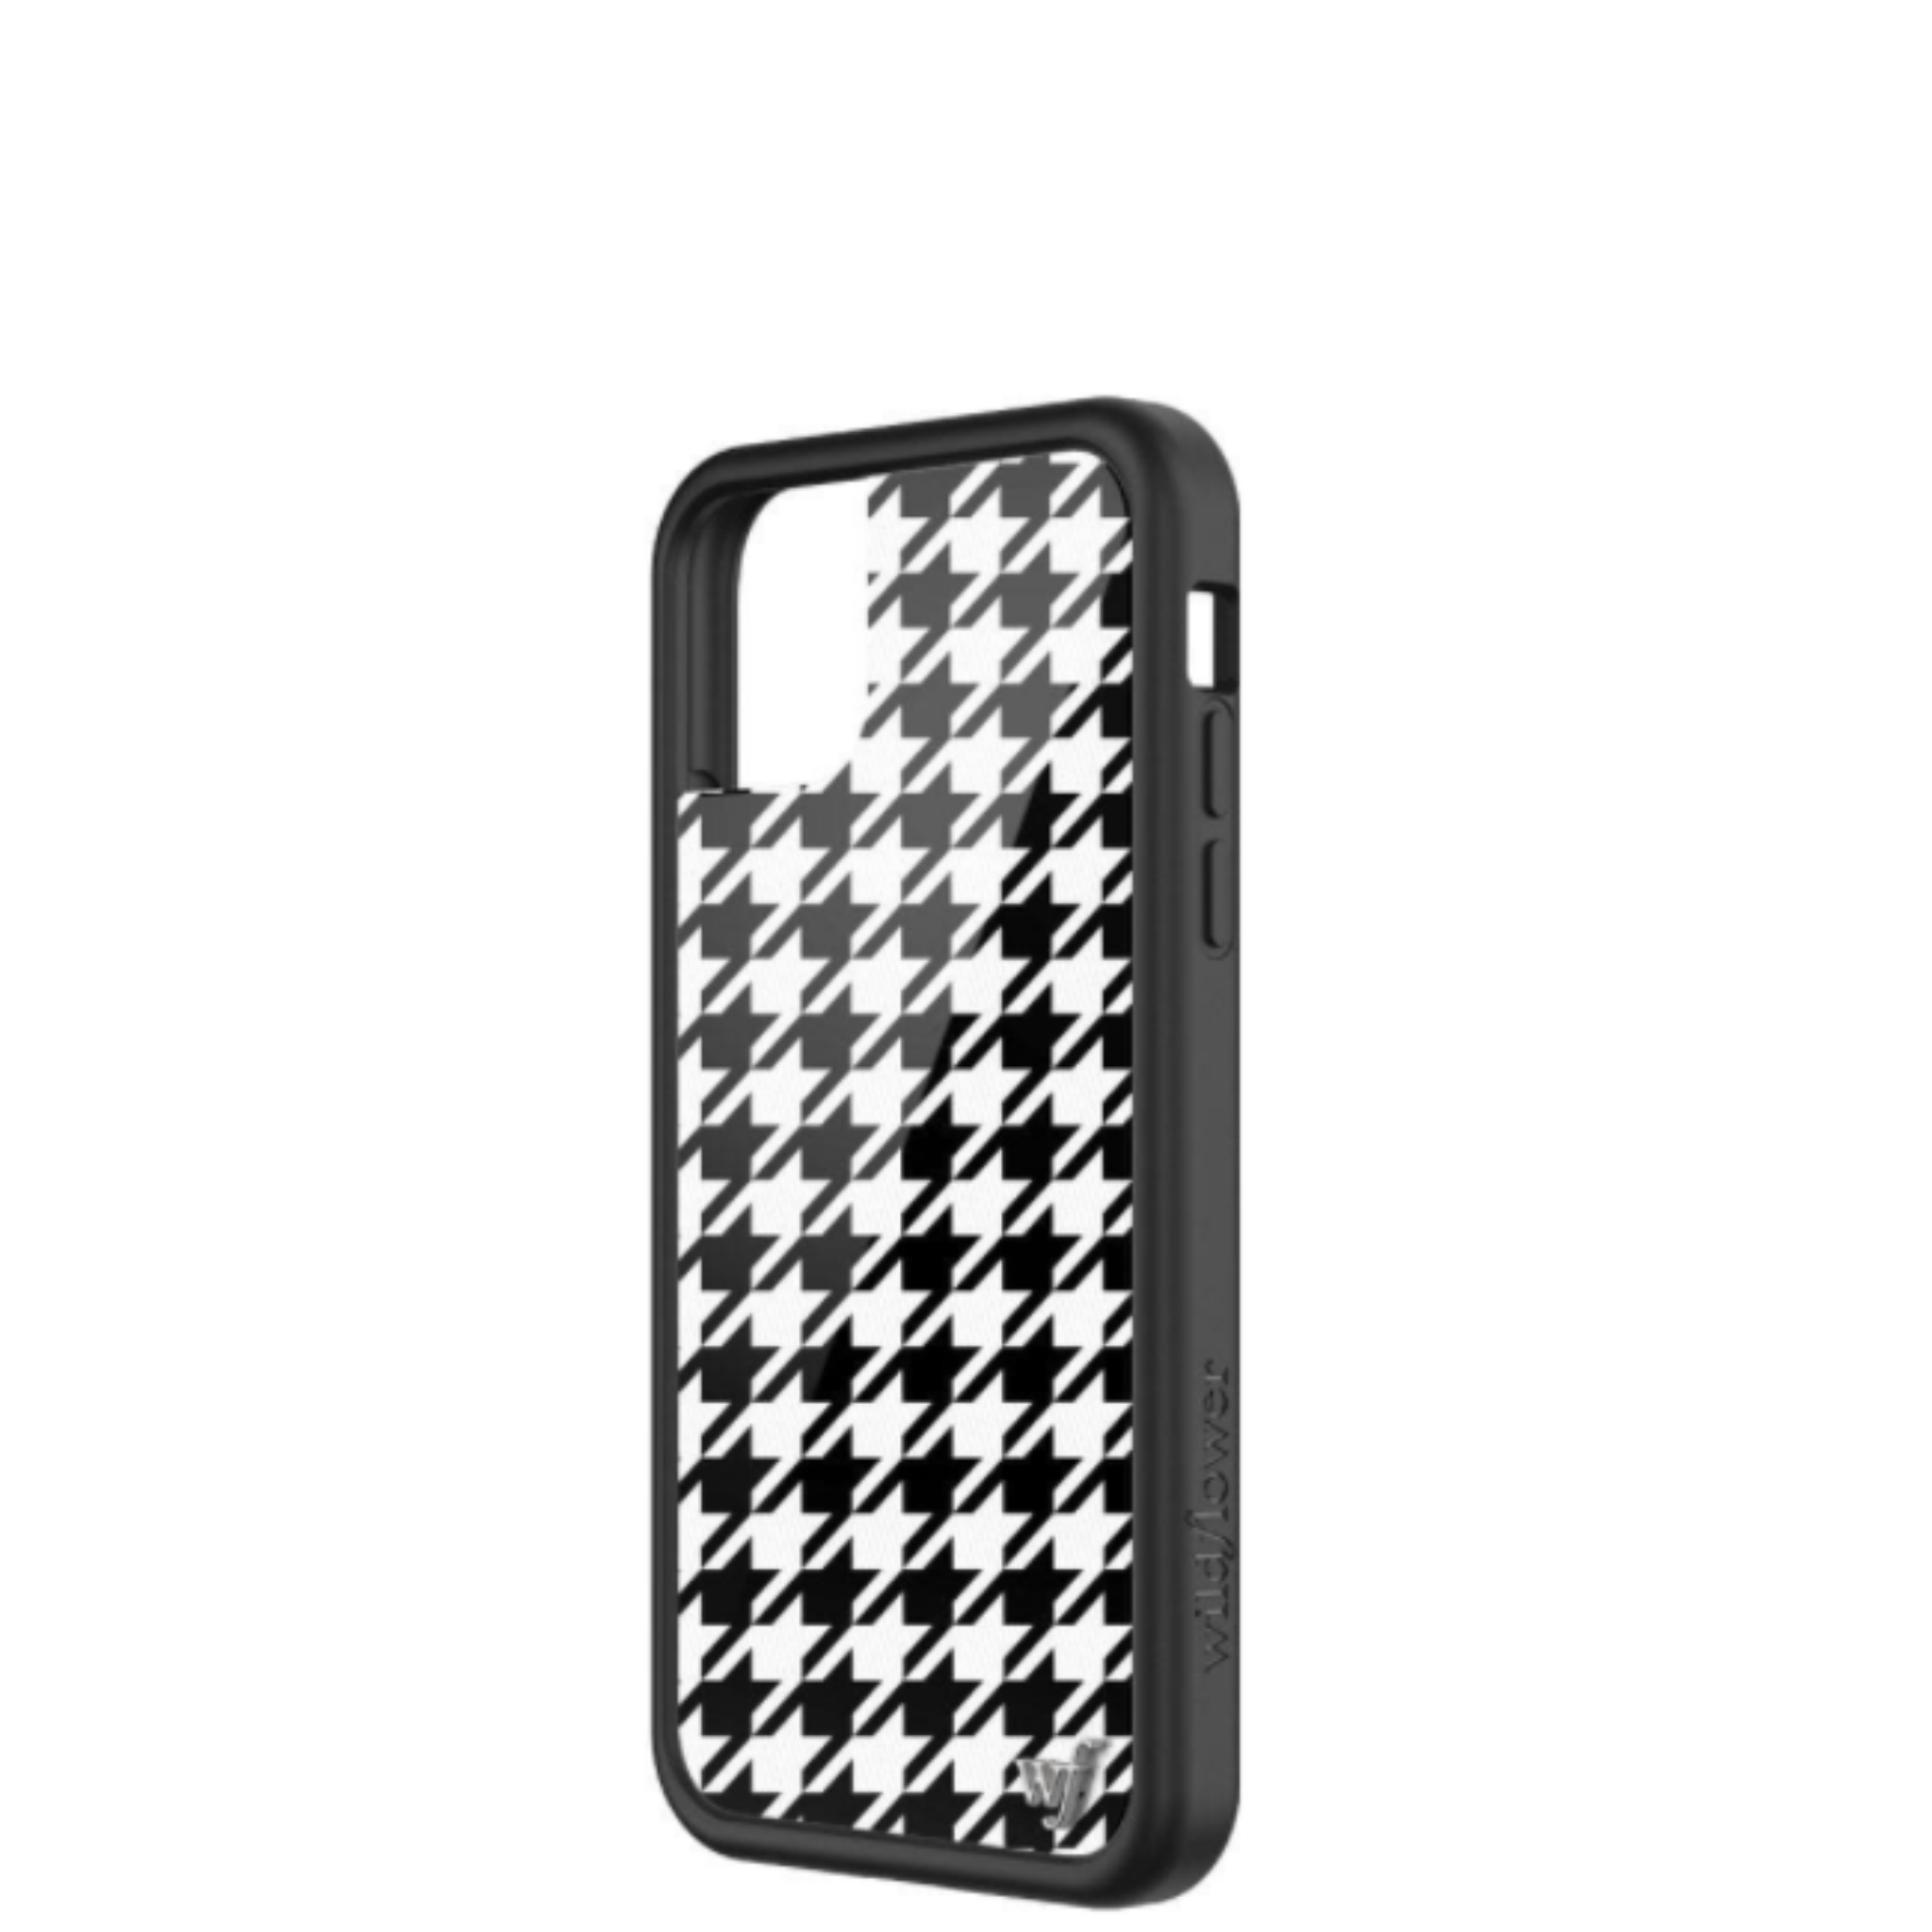 Houndstooth iPhone 11 Pro Case